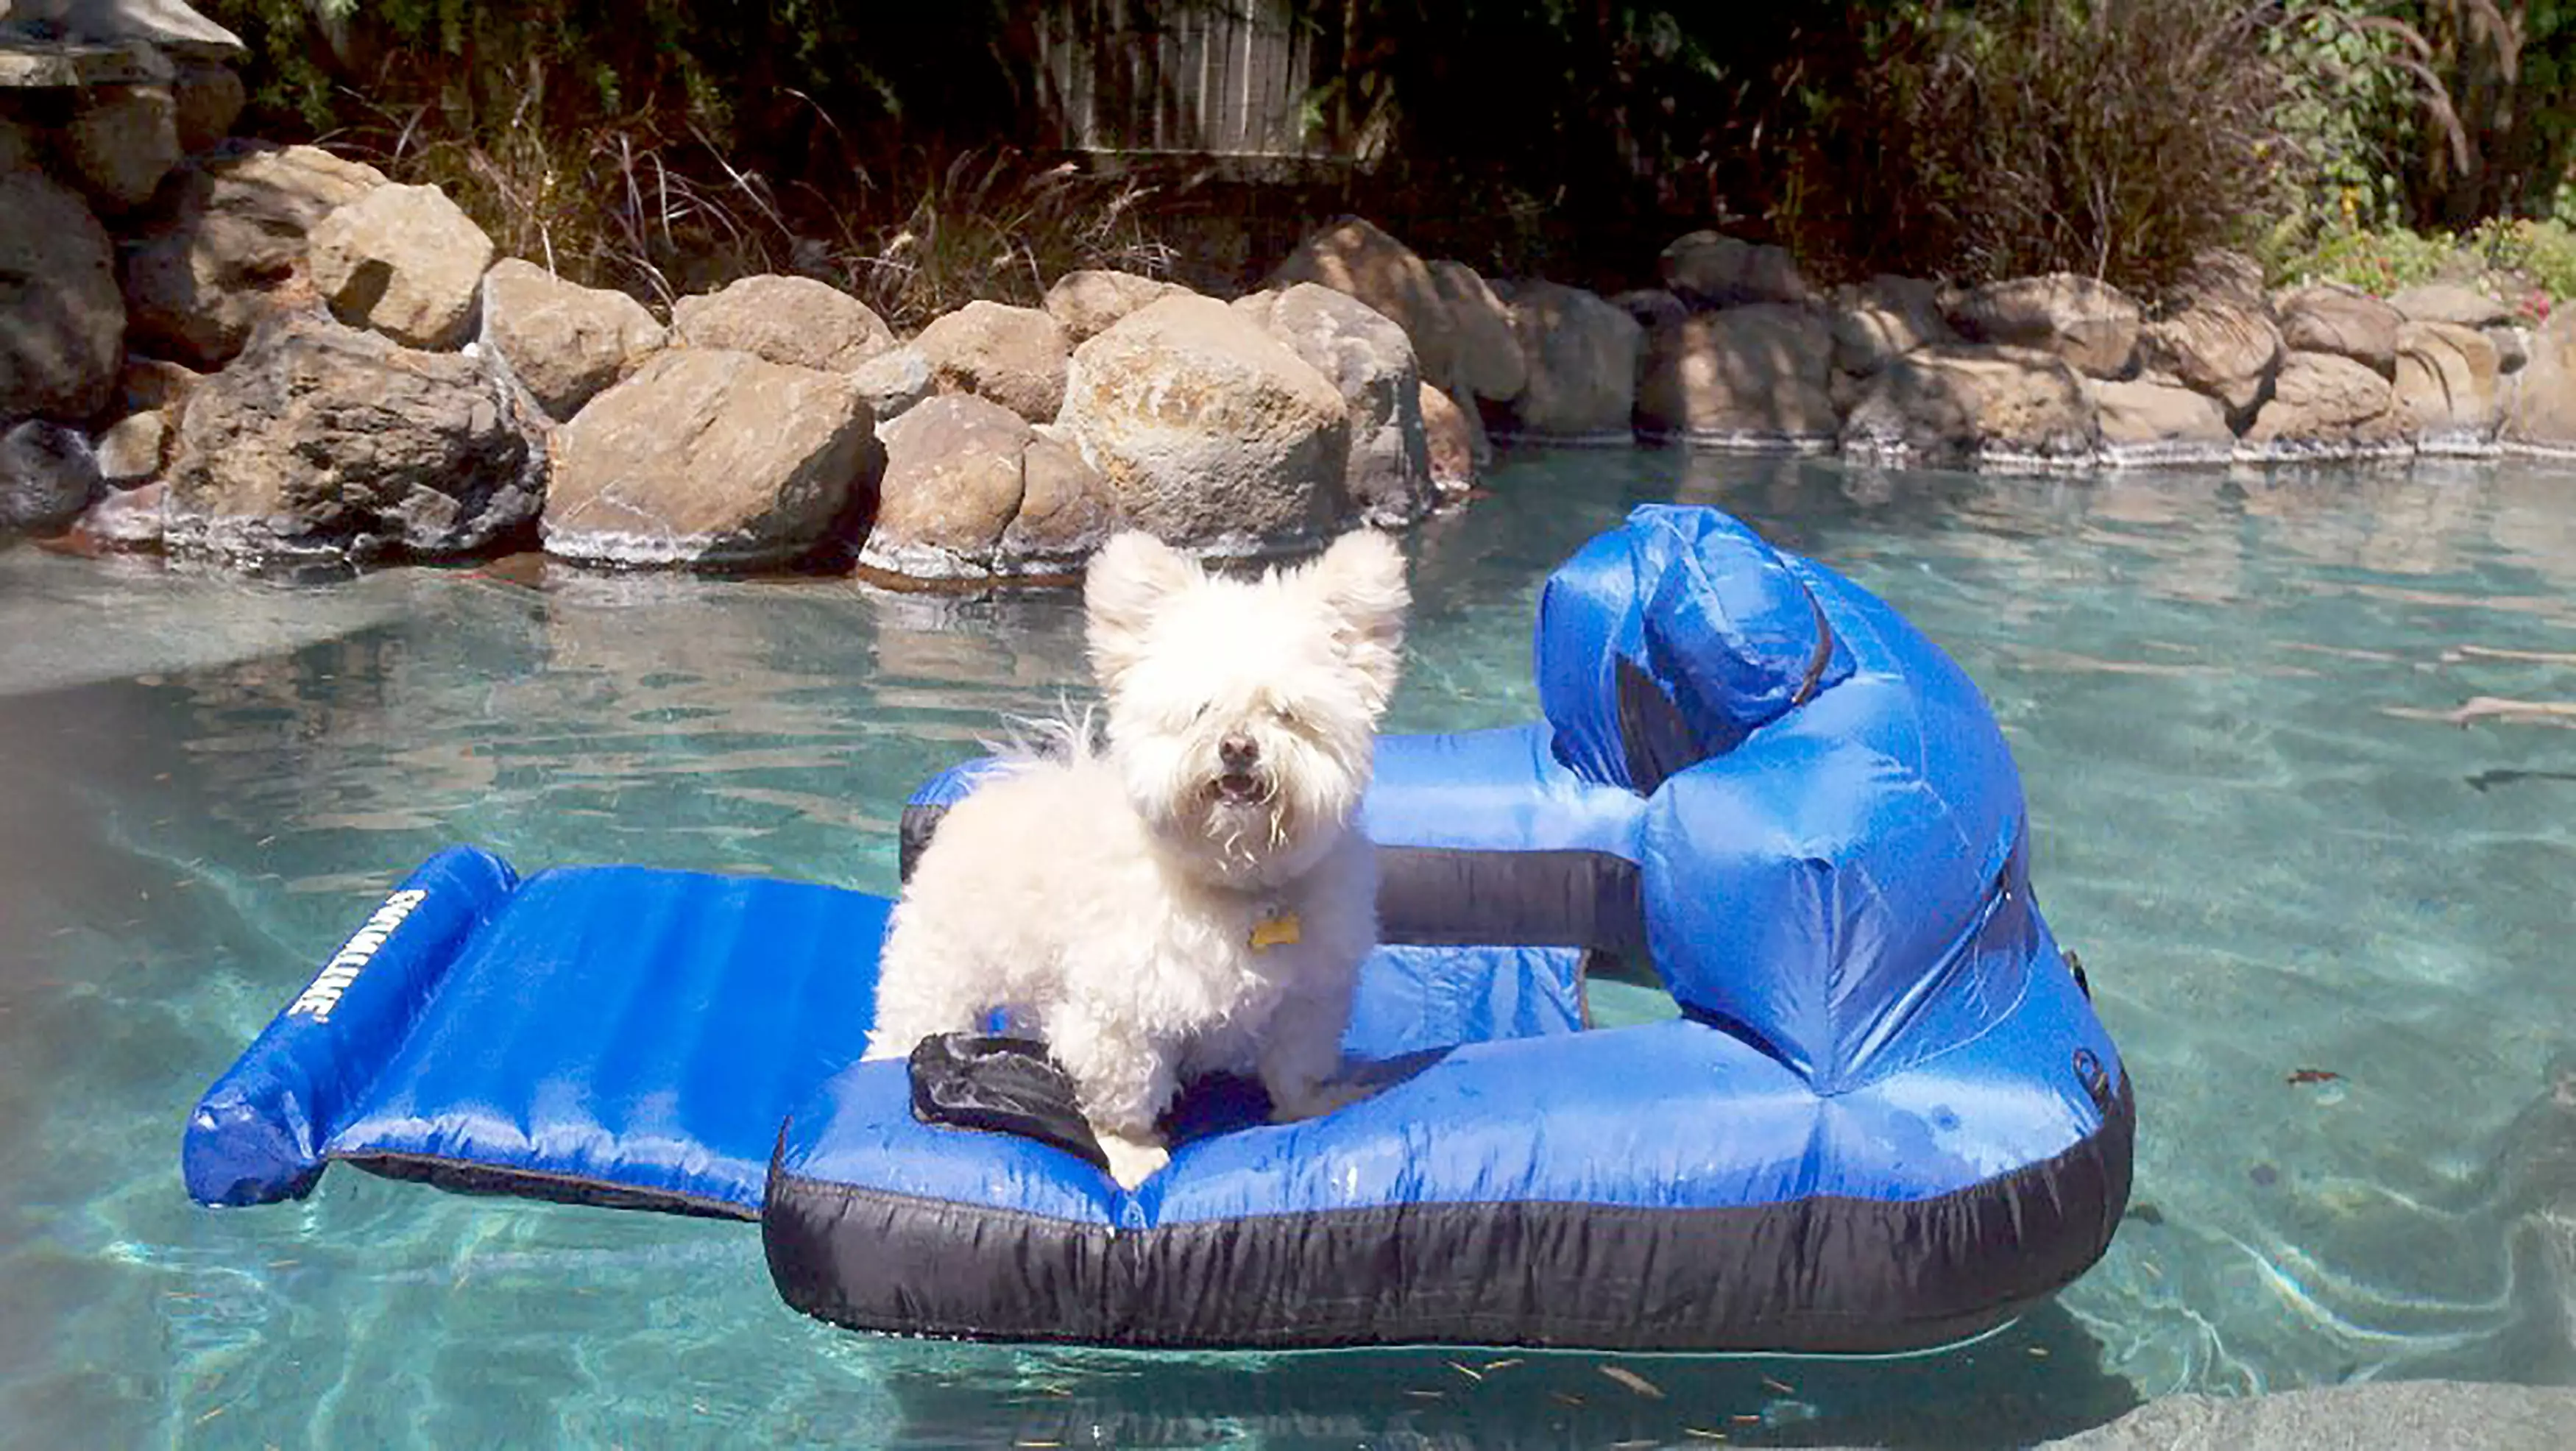 Gizmo loving life on a pool inflatable.